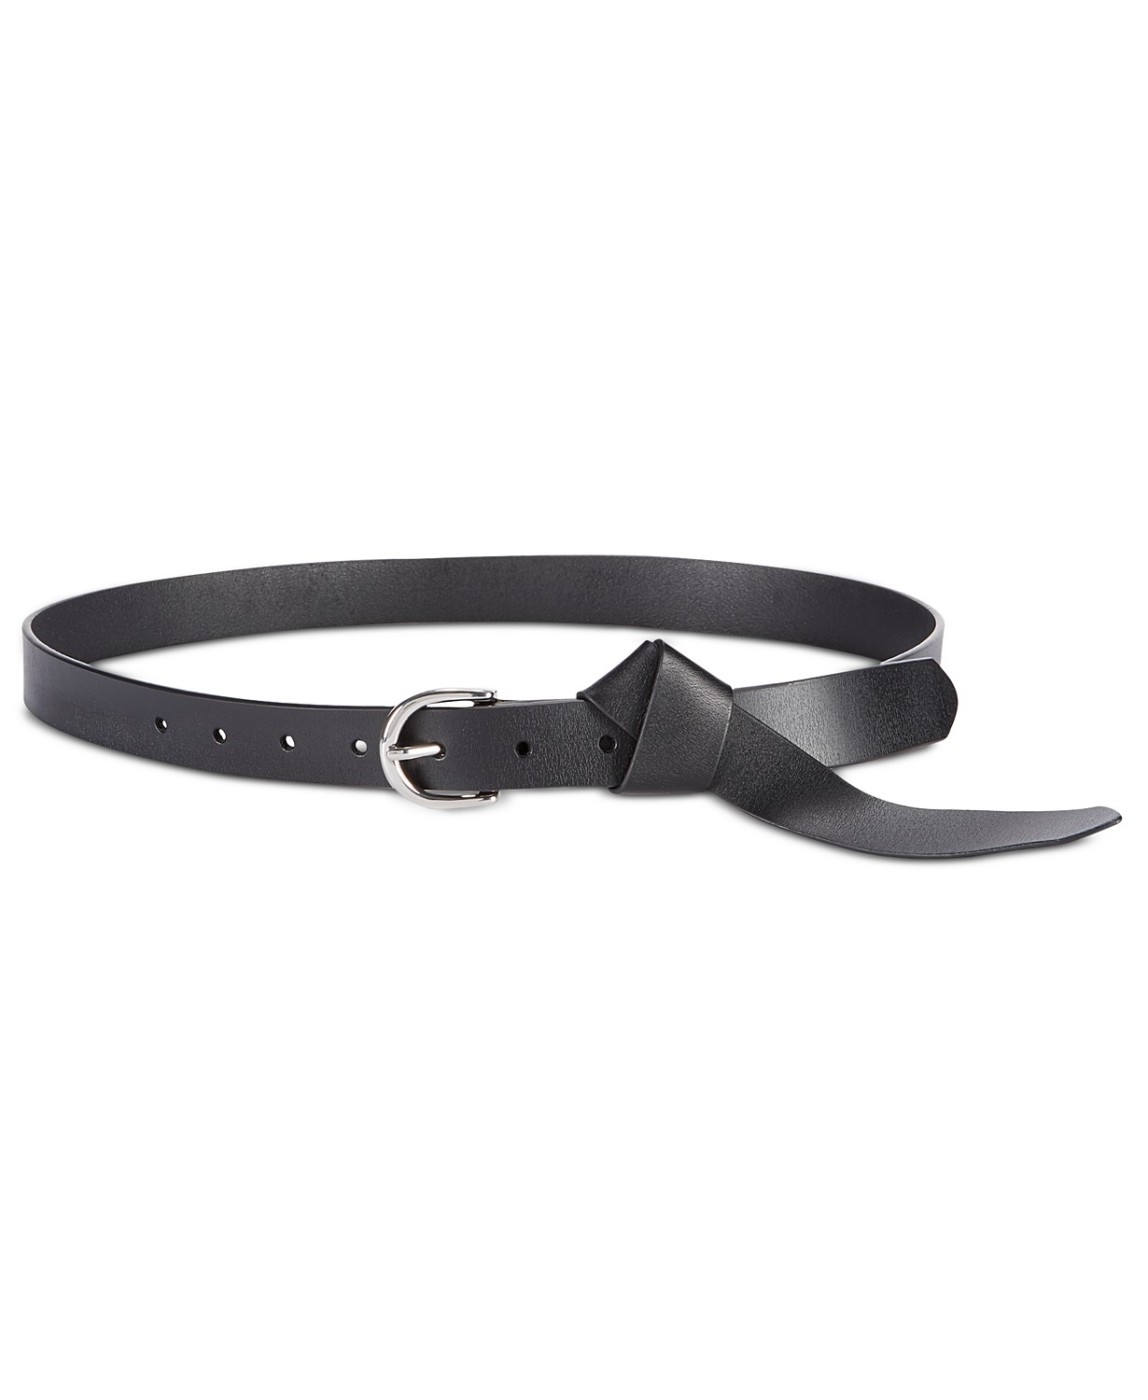 woocommerce-673321-2209615.cloudwaysapps.com-inc-international-concepts-womens-black-leather-knotted-belt